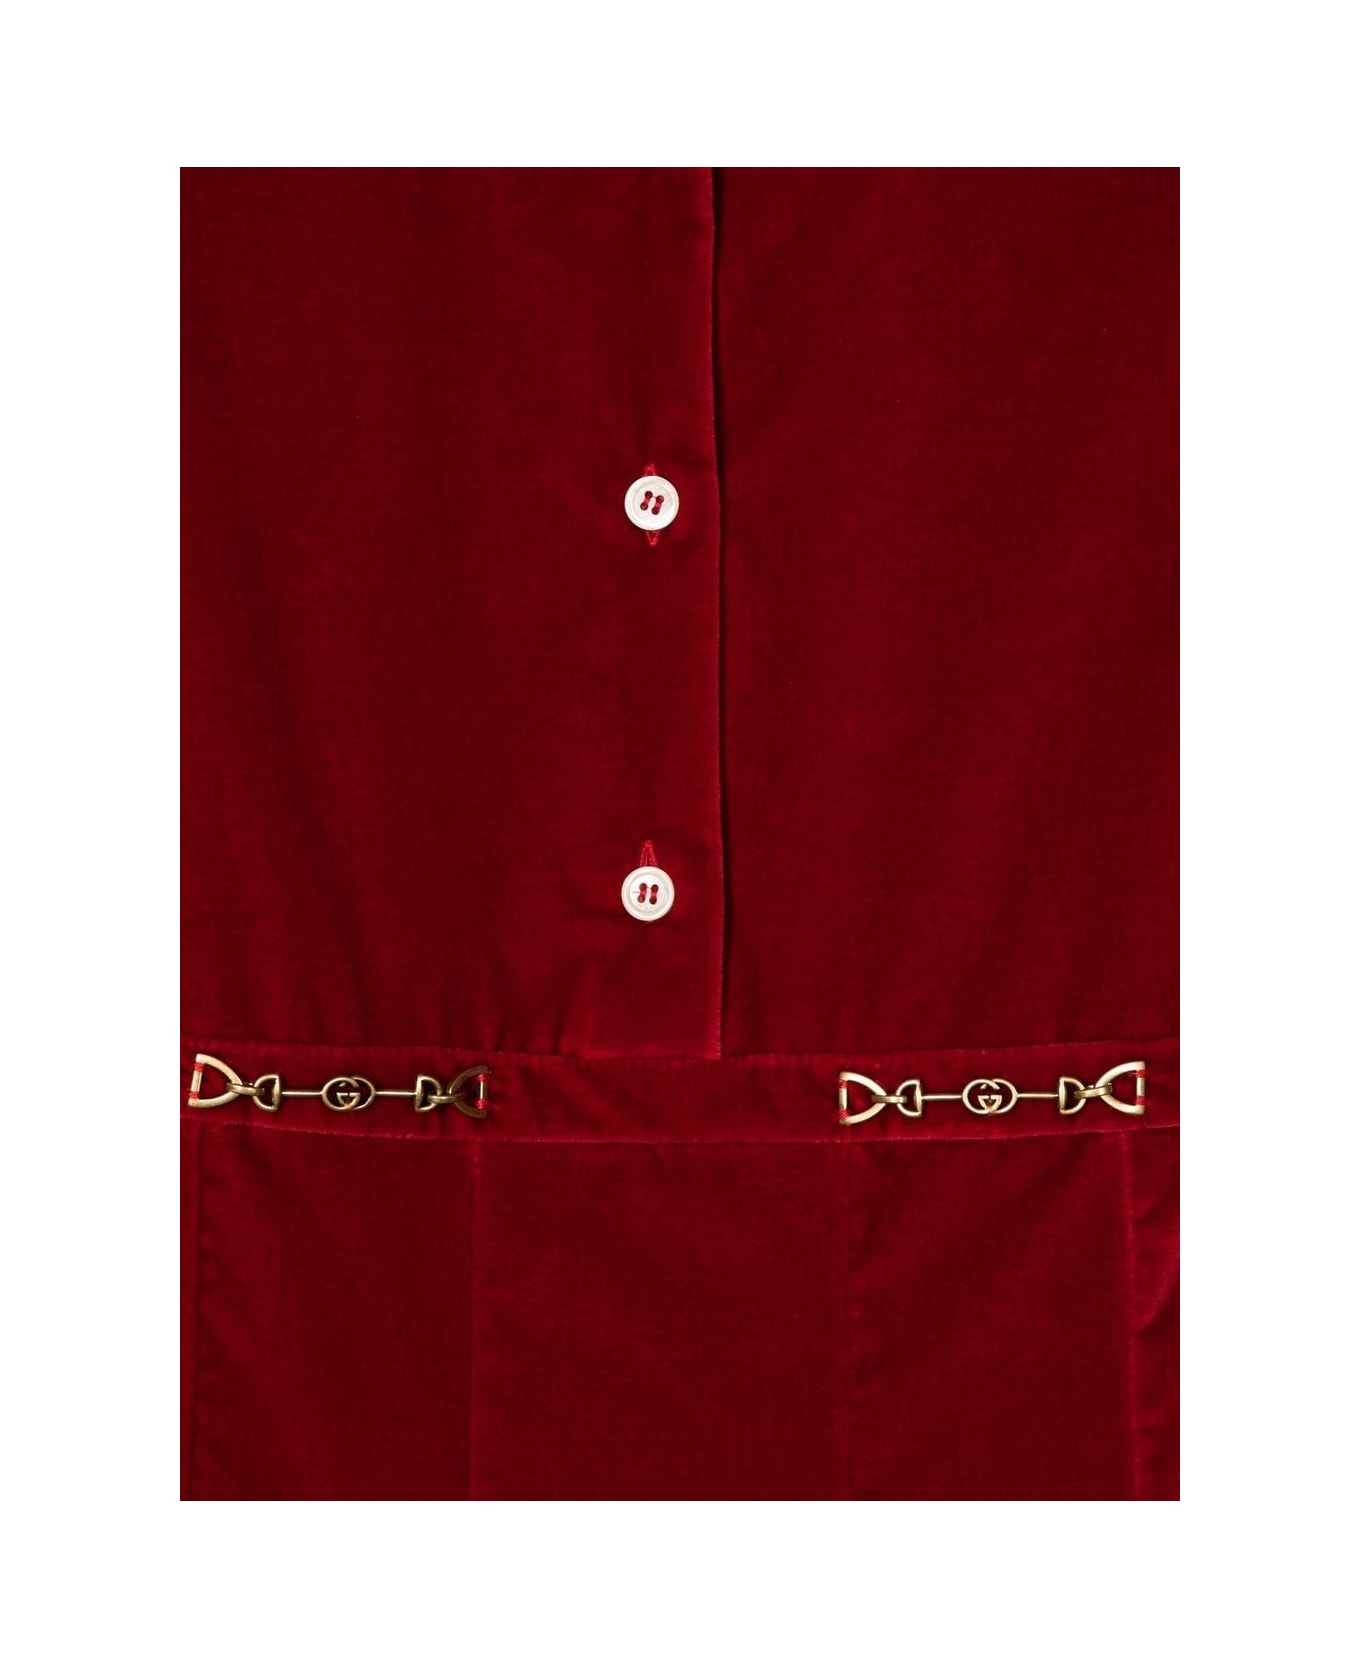 Gucci Kids Dresses Red - Red